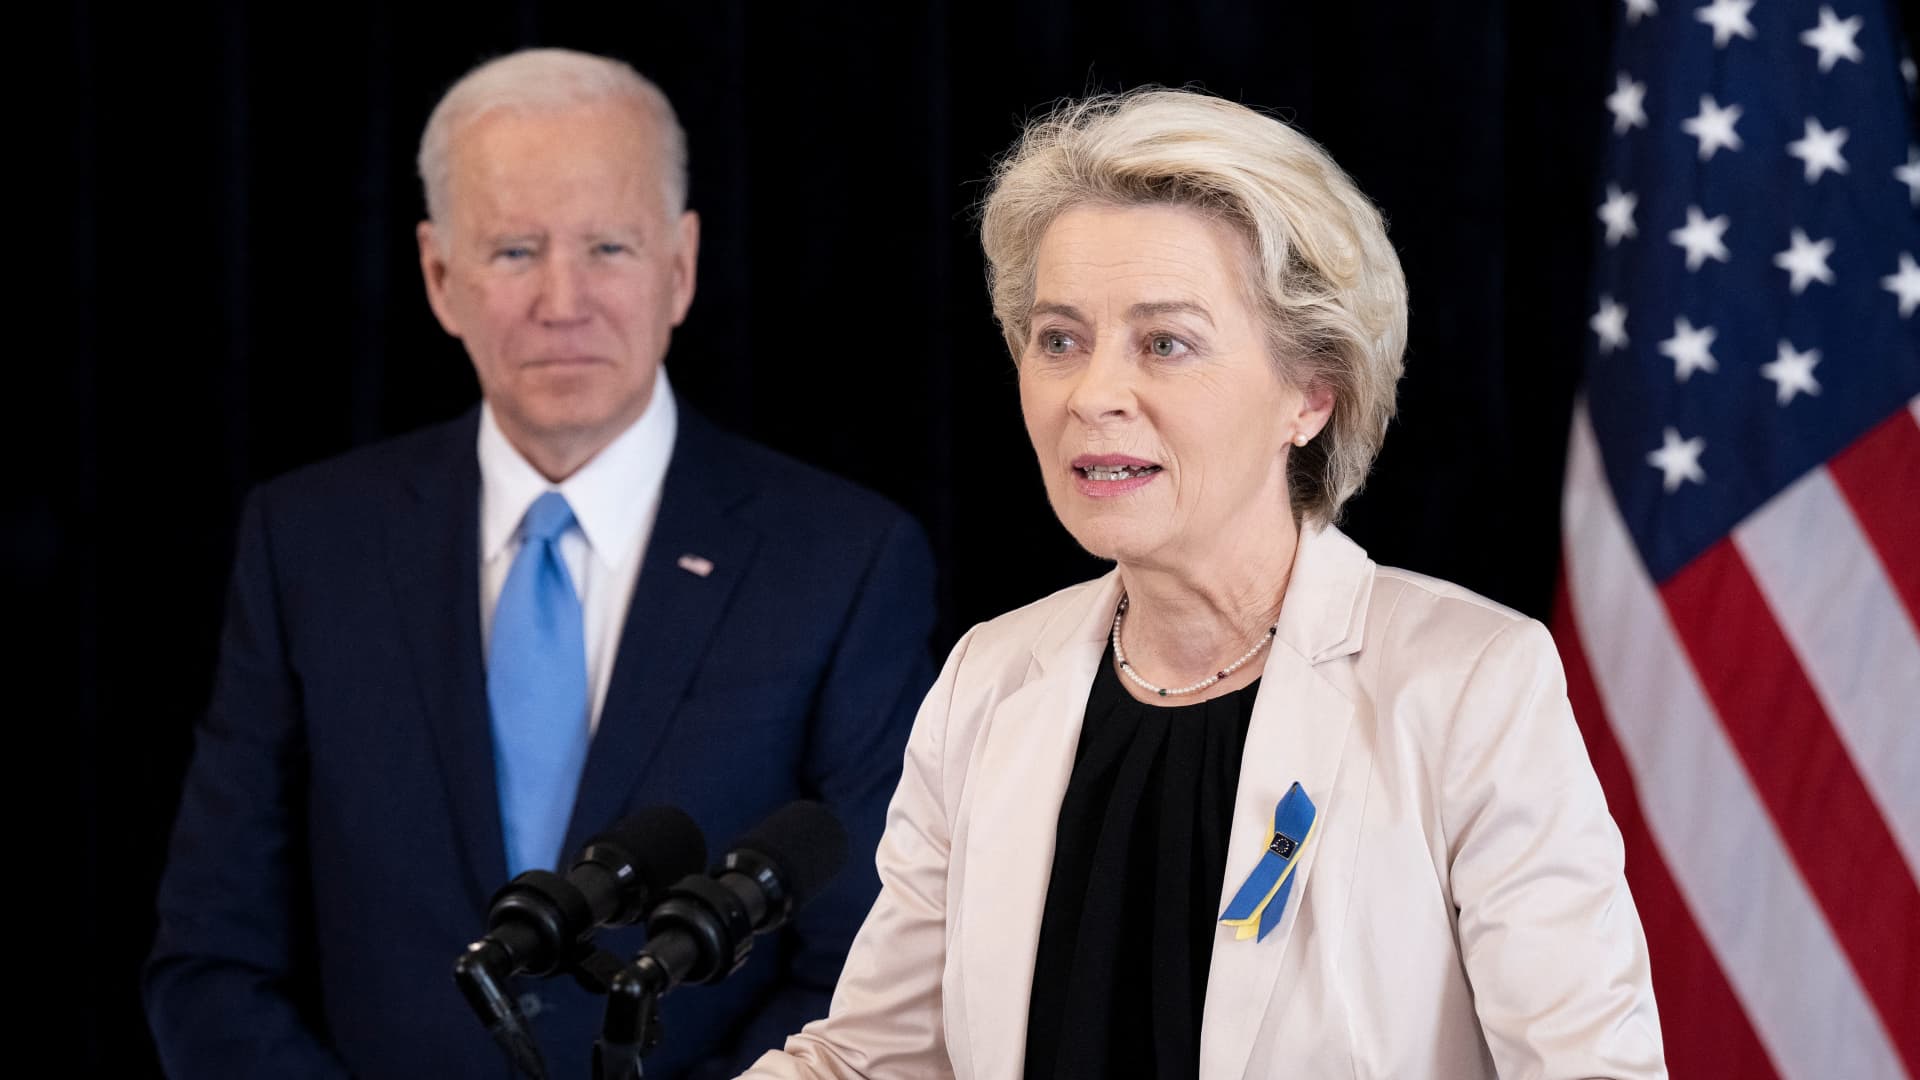 US President Joe Biden listens while European Commission President Ursula von der Leyen makes a statement about Russia at the US Chief of Mission residence in Brussels, on March 25, 2022.